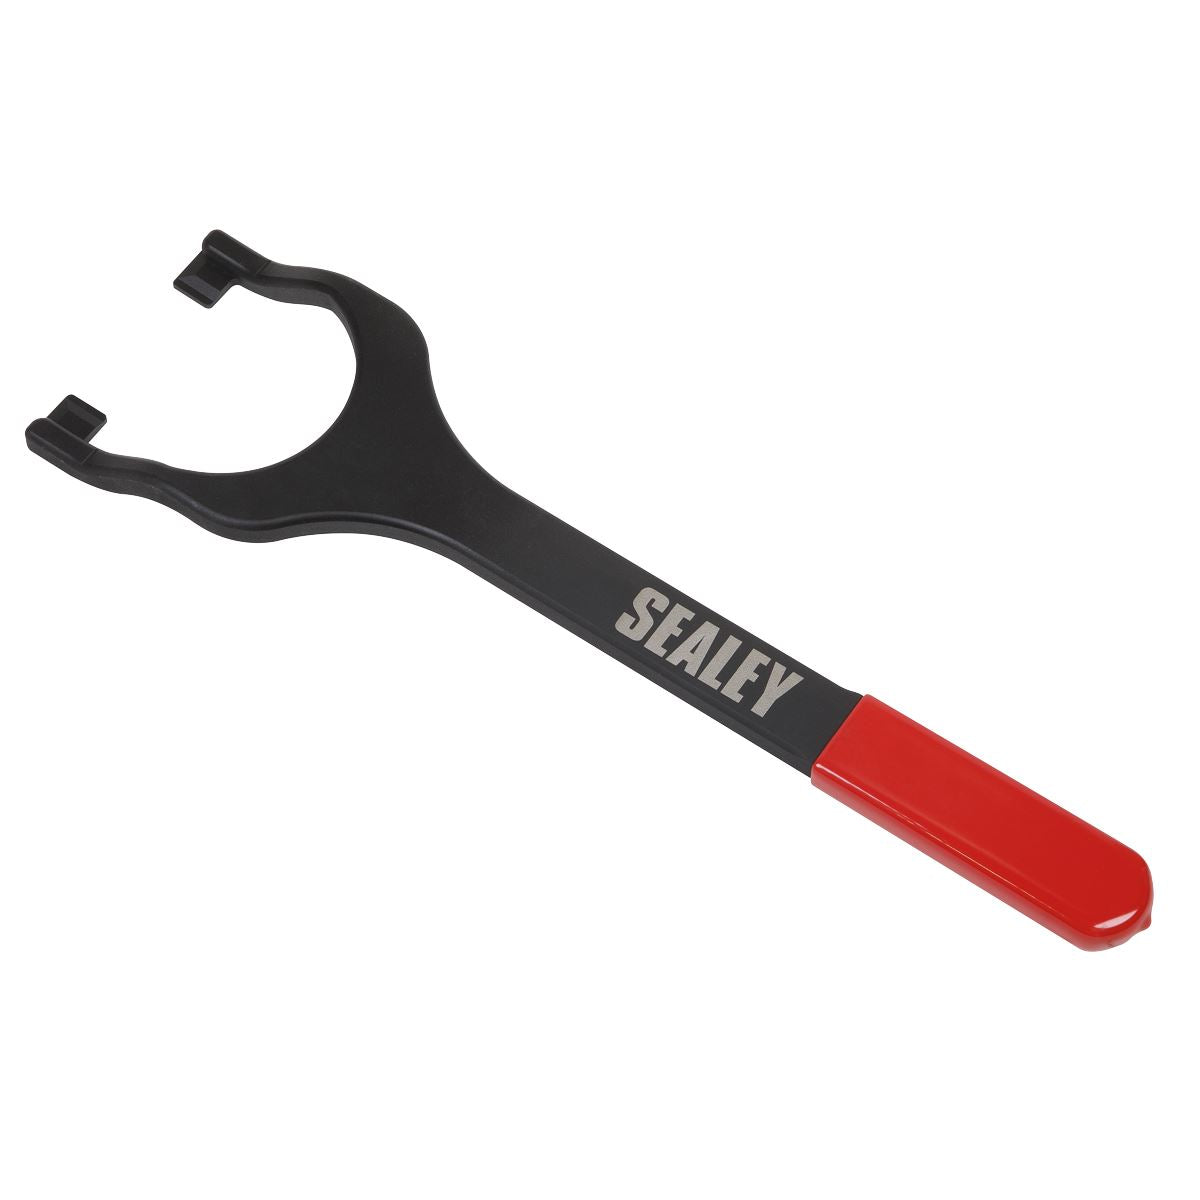 Sealey Driveshaft Extractor Fork